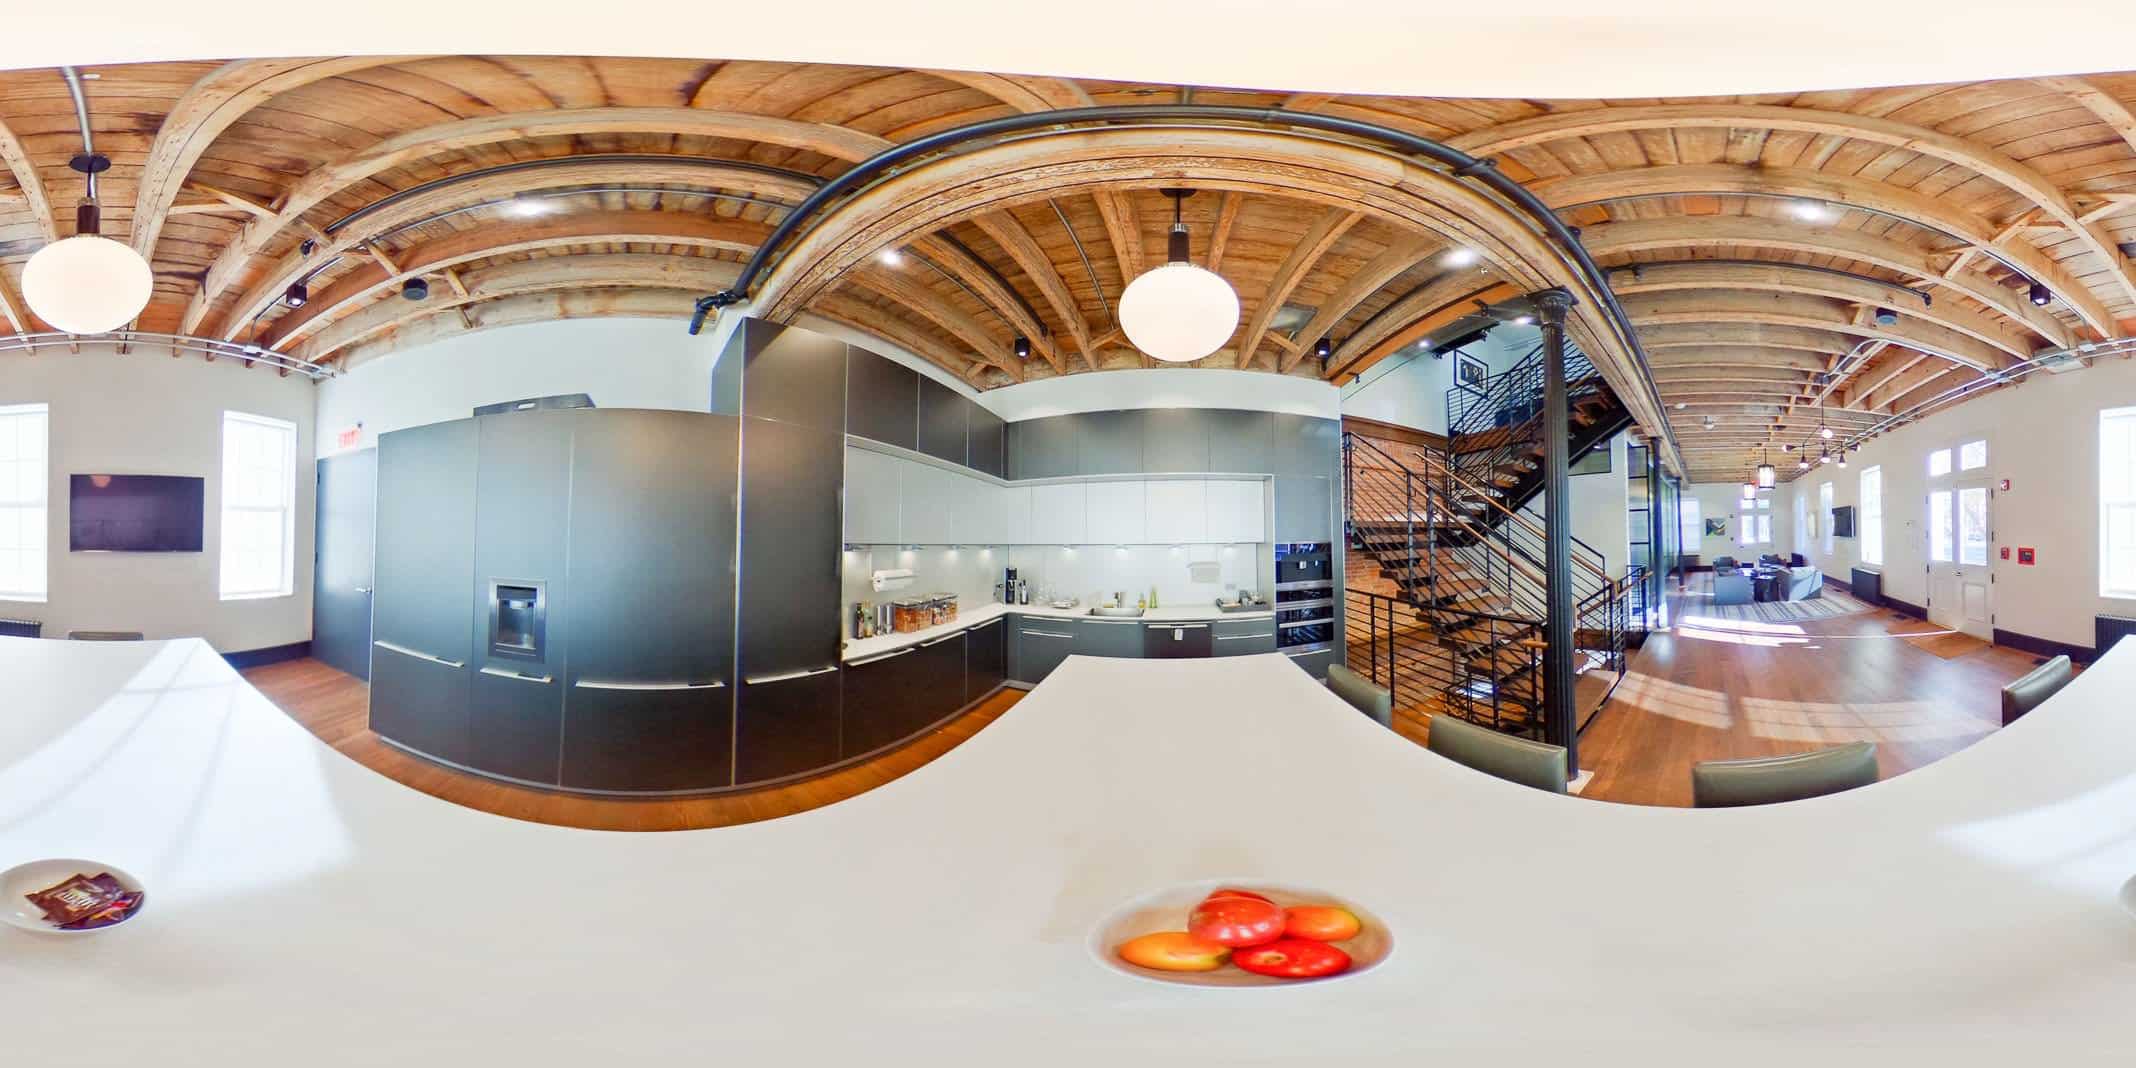 Using the Ricoh Theta S for Architectural and Real Estate Virtual